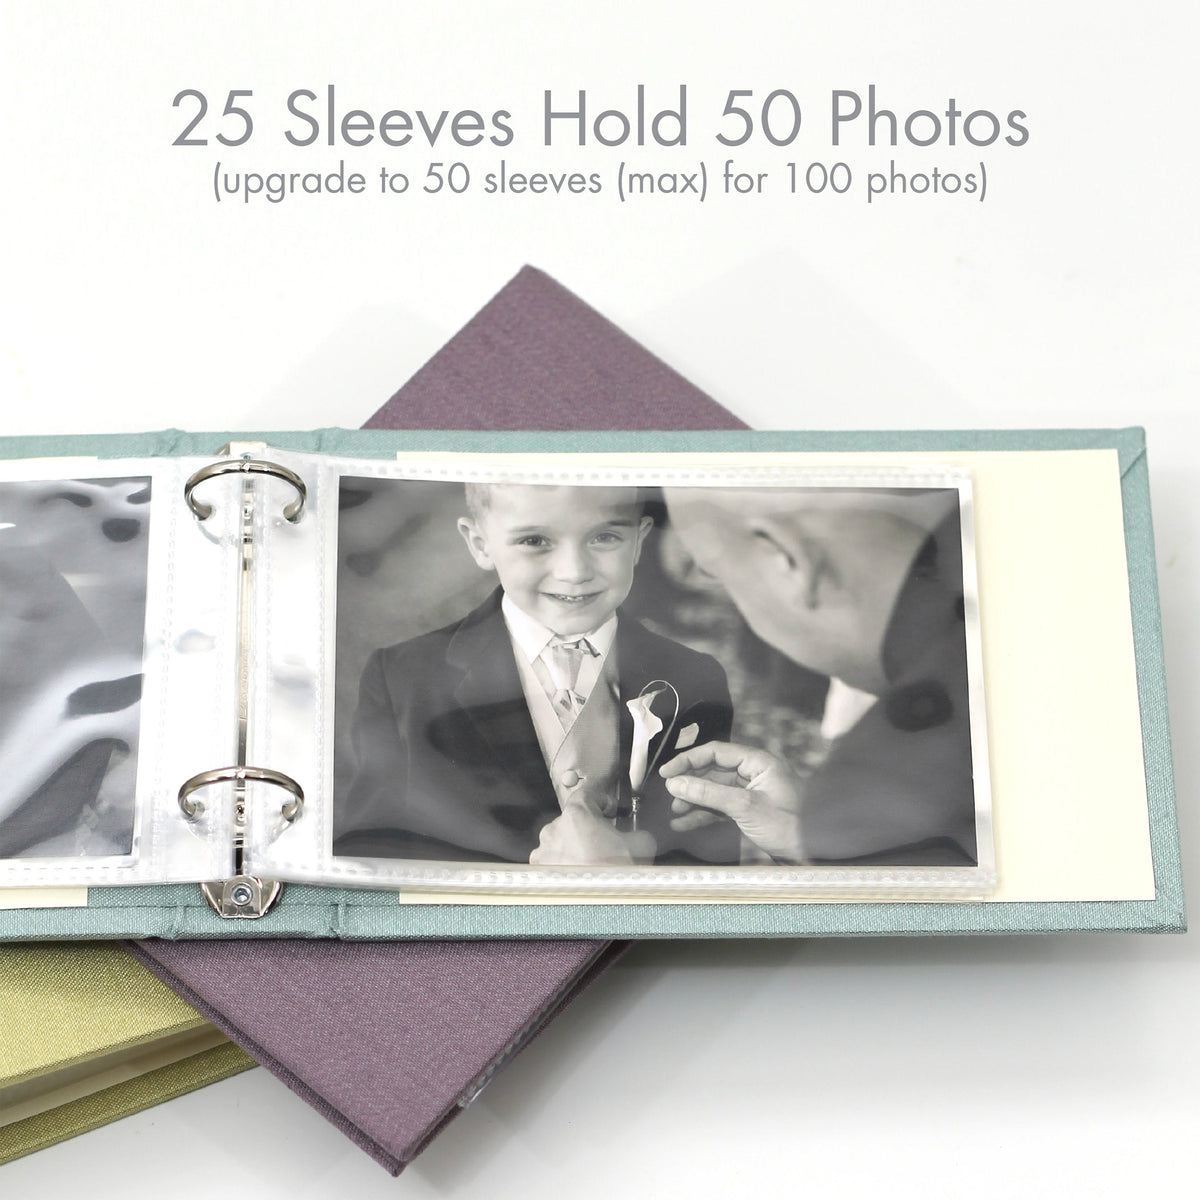 Small Photo Binder | for 4x6 Photos | with Ocean Blue Vegan Leather